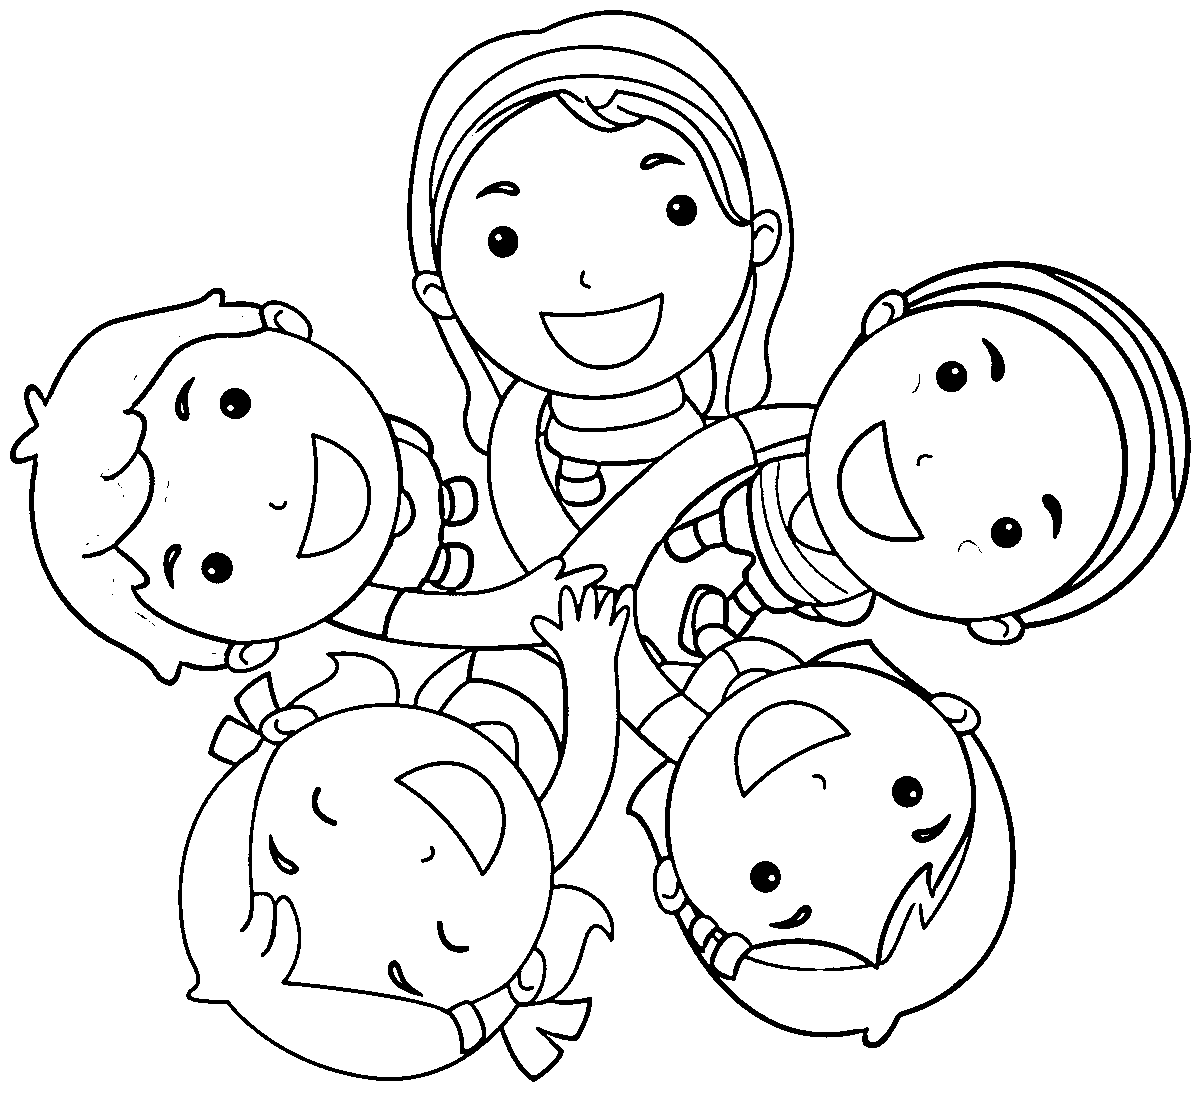 Coloring Pages For Your Best Friend